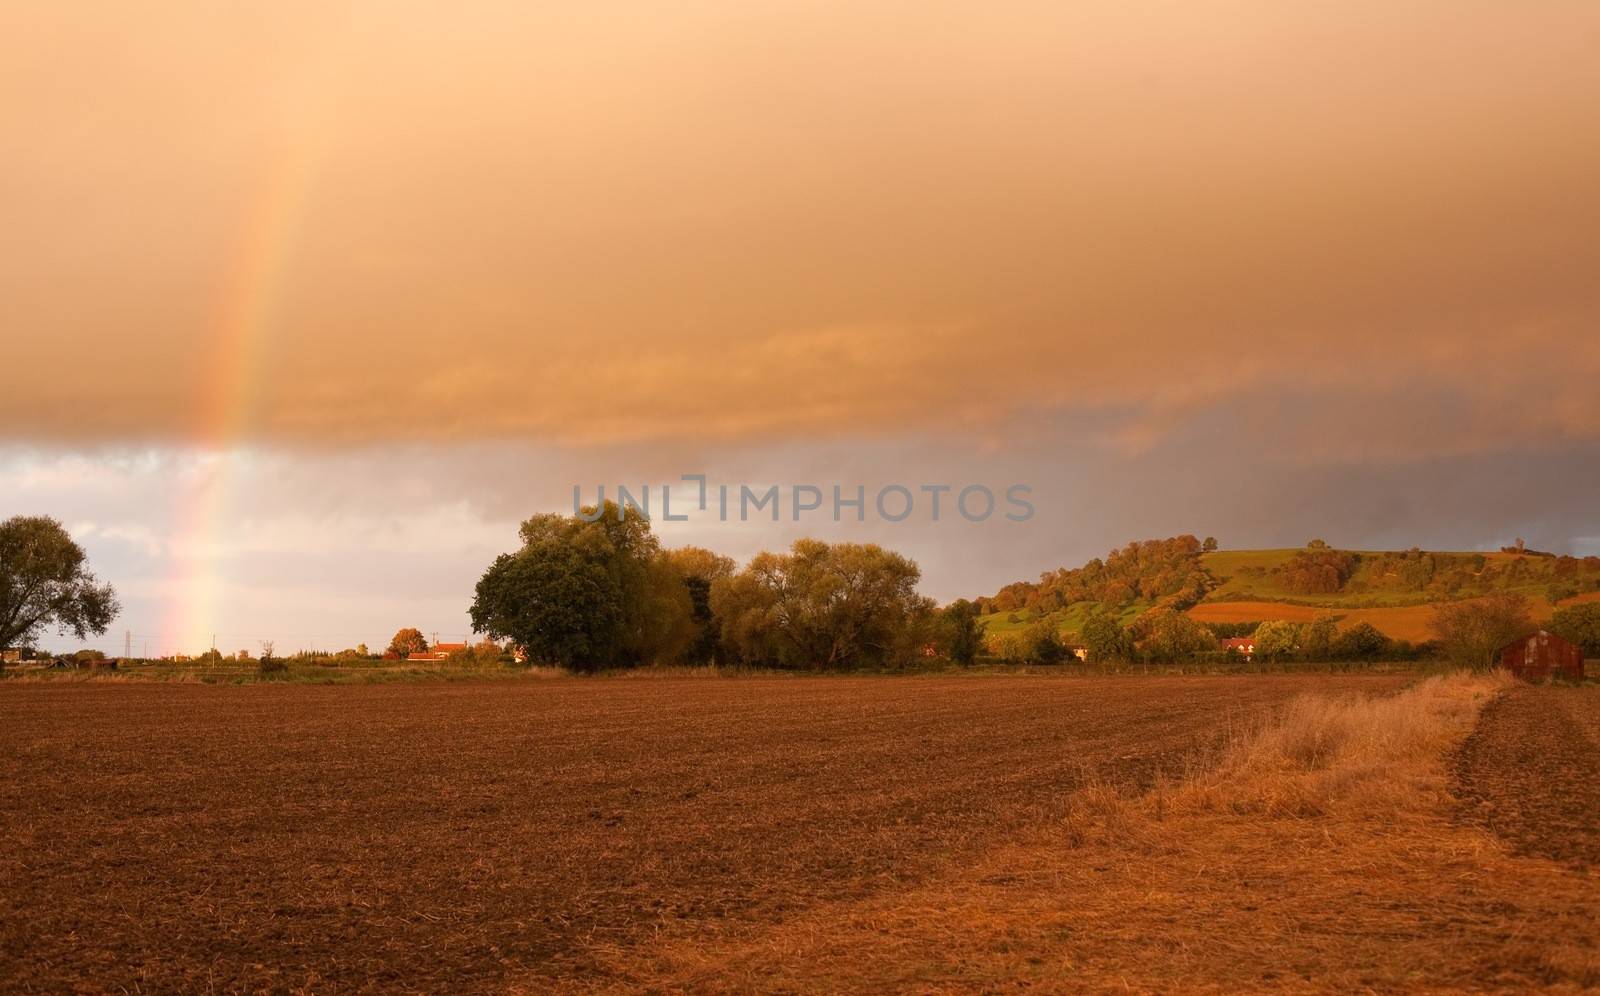 Looking towards Meon Hill over farmland with a dramatic sunset and rainbow, Gloucestershire, England.